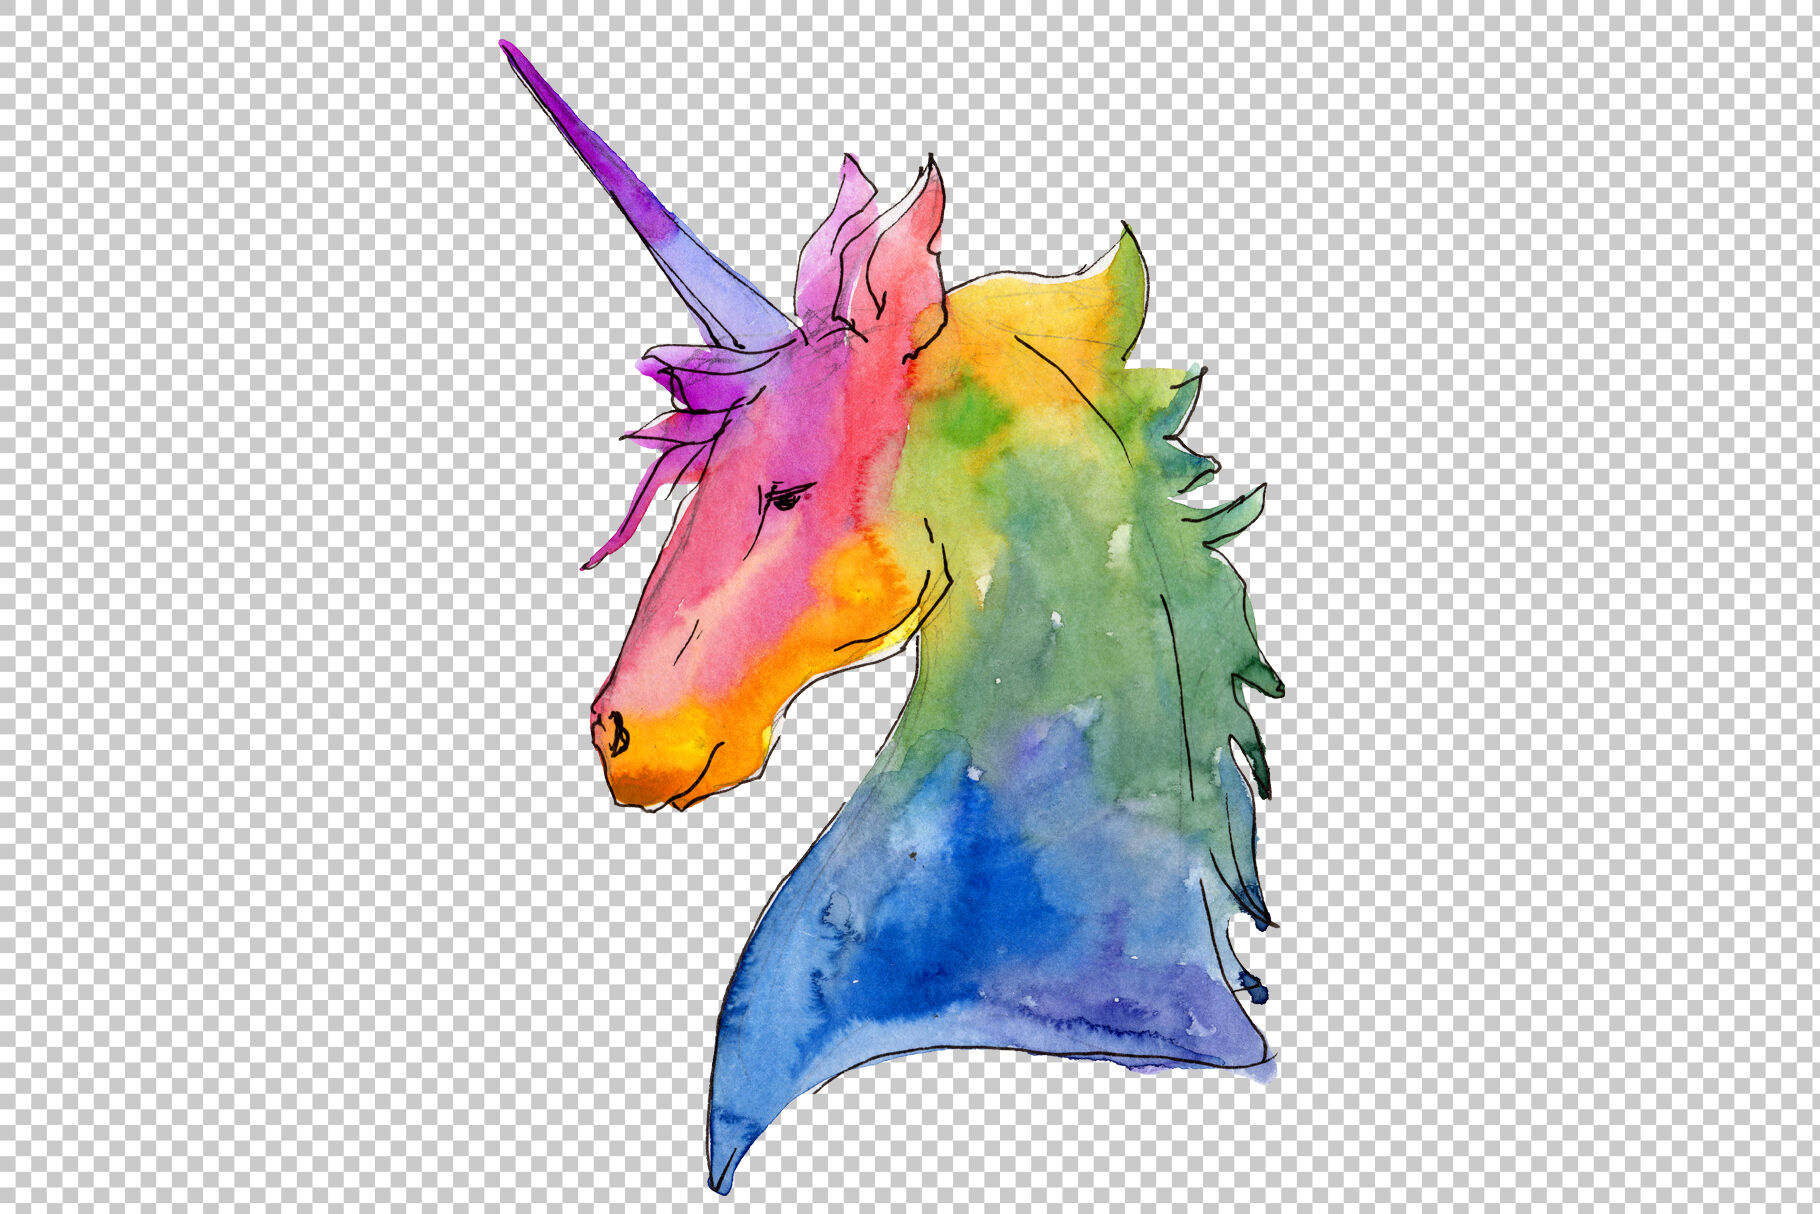 Watercolor Unicorn Clipart, Free Commercial Use, Hand